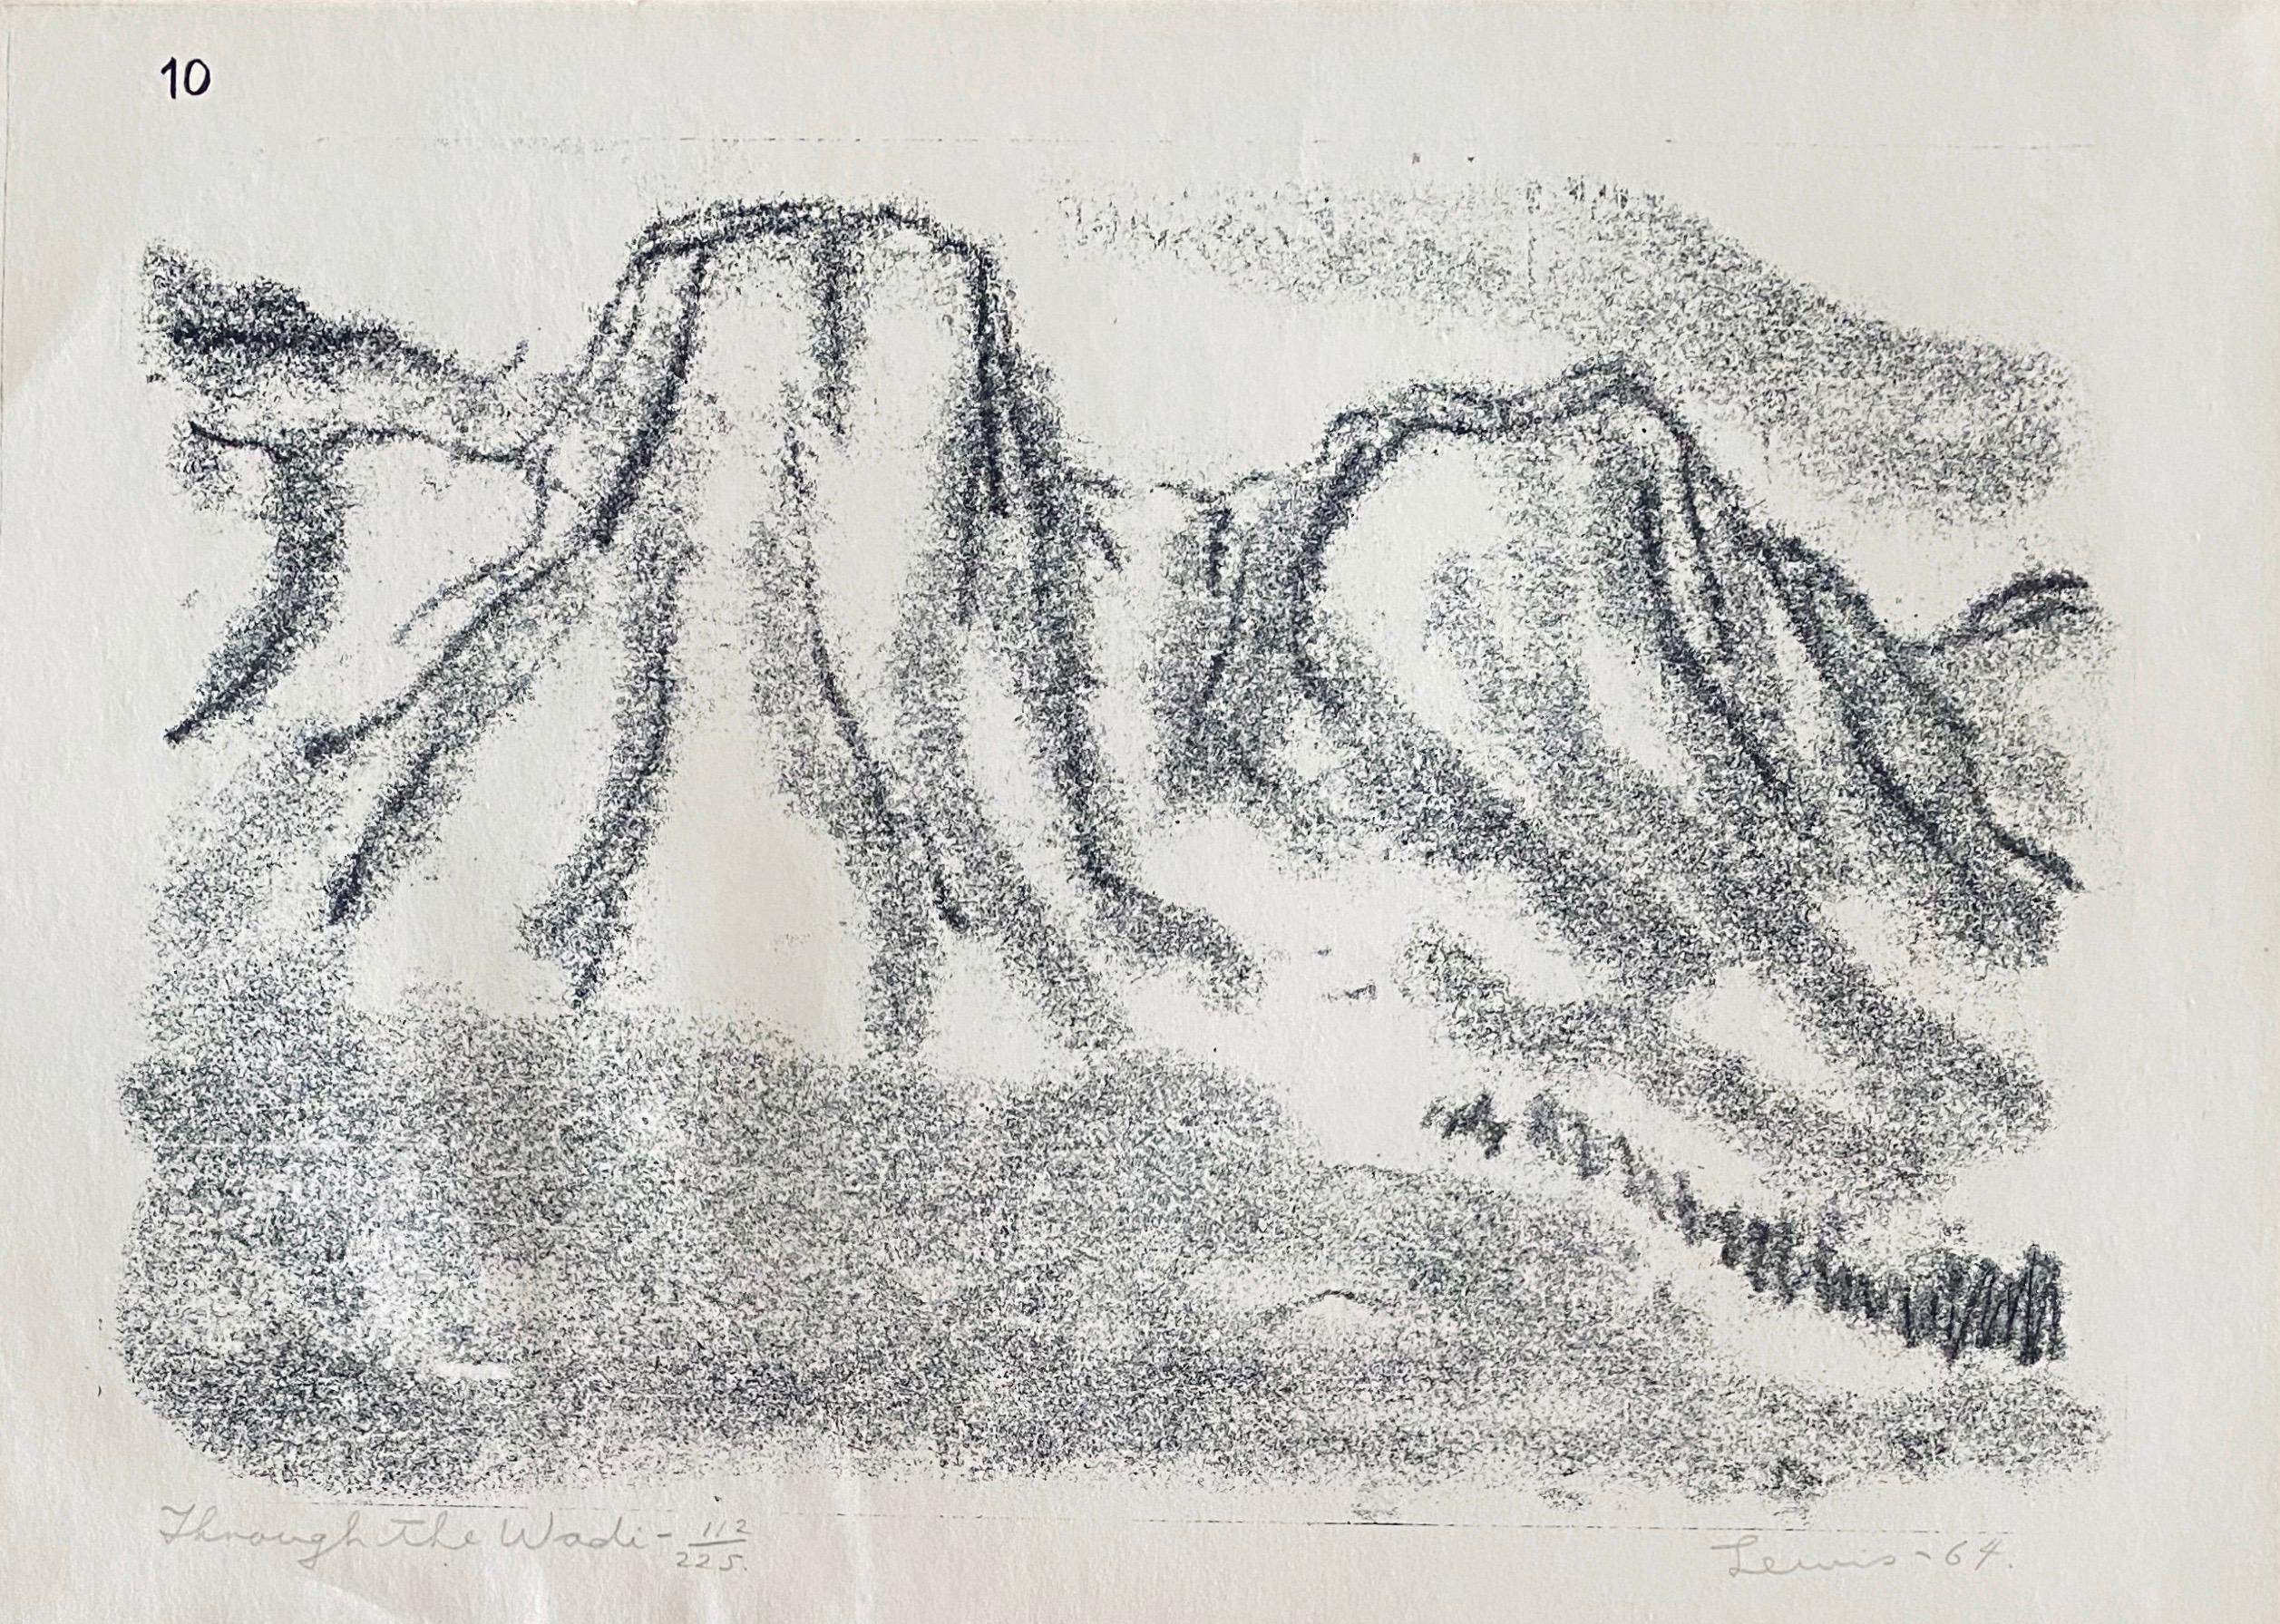 Stanley Lewis Abstract Print - "Through The Wadi" from Wanderers Illustrations 112/225